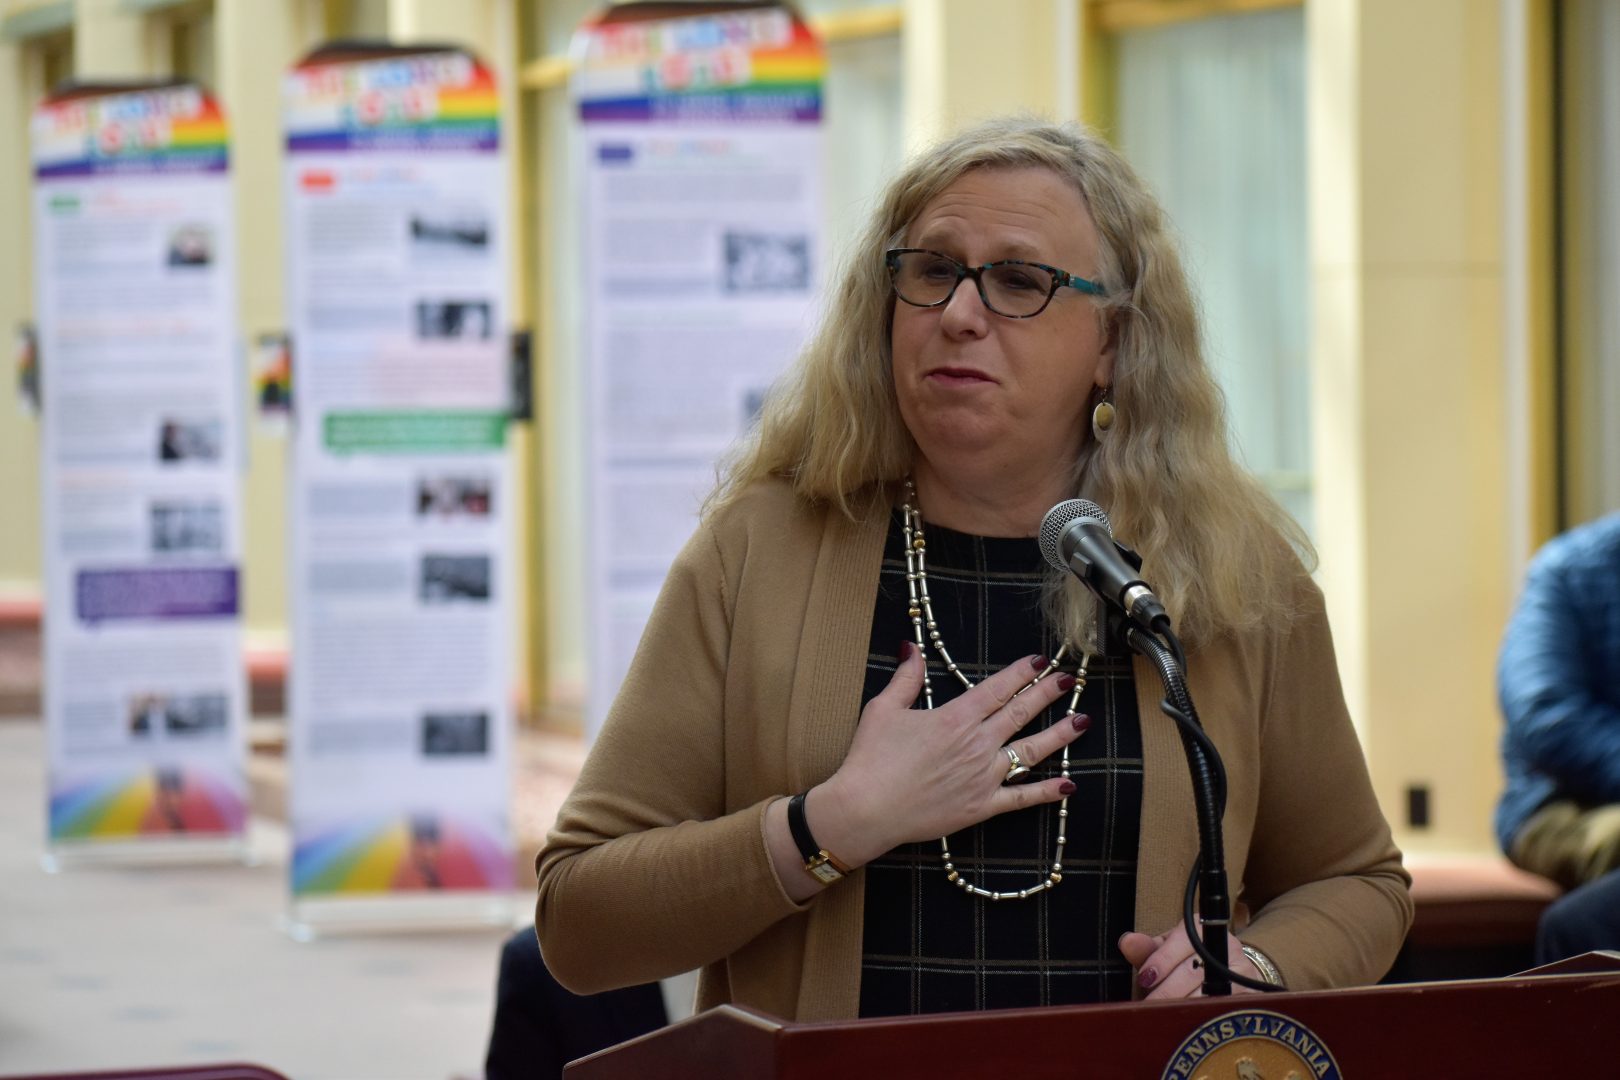 Dr. Rachel Levine, secretary for the Pennsylvania Department of Health, speaks during a ceremony in the state Capitol on Monday, March 18, 2019.